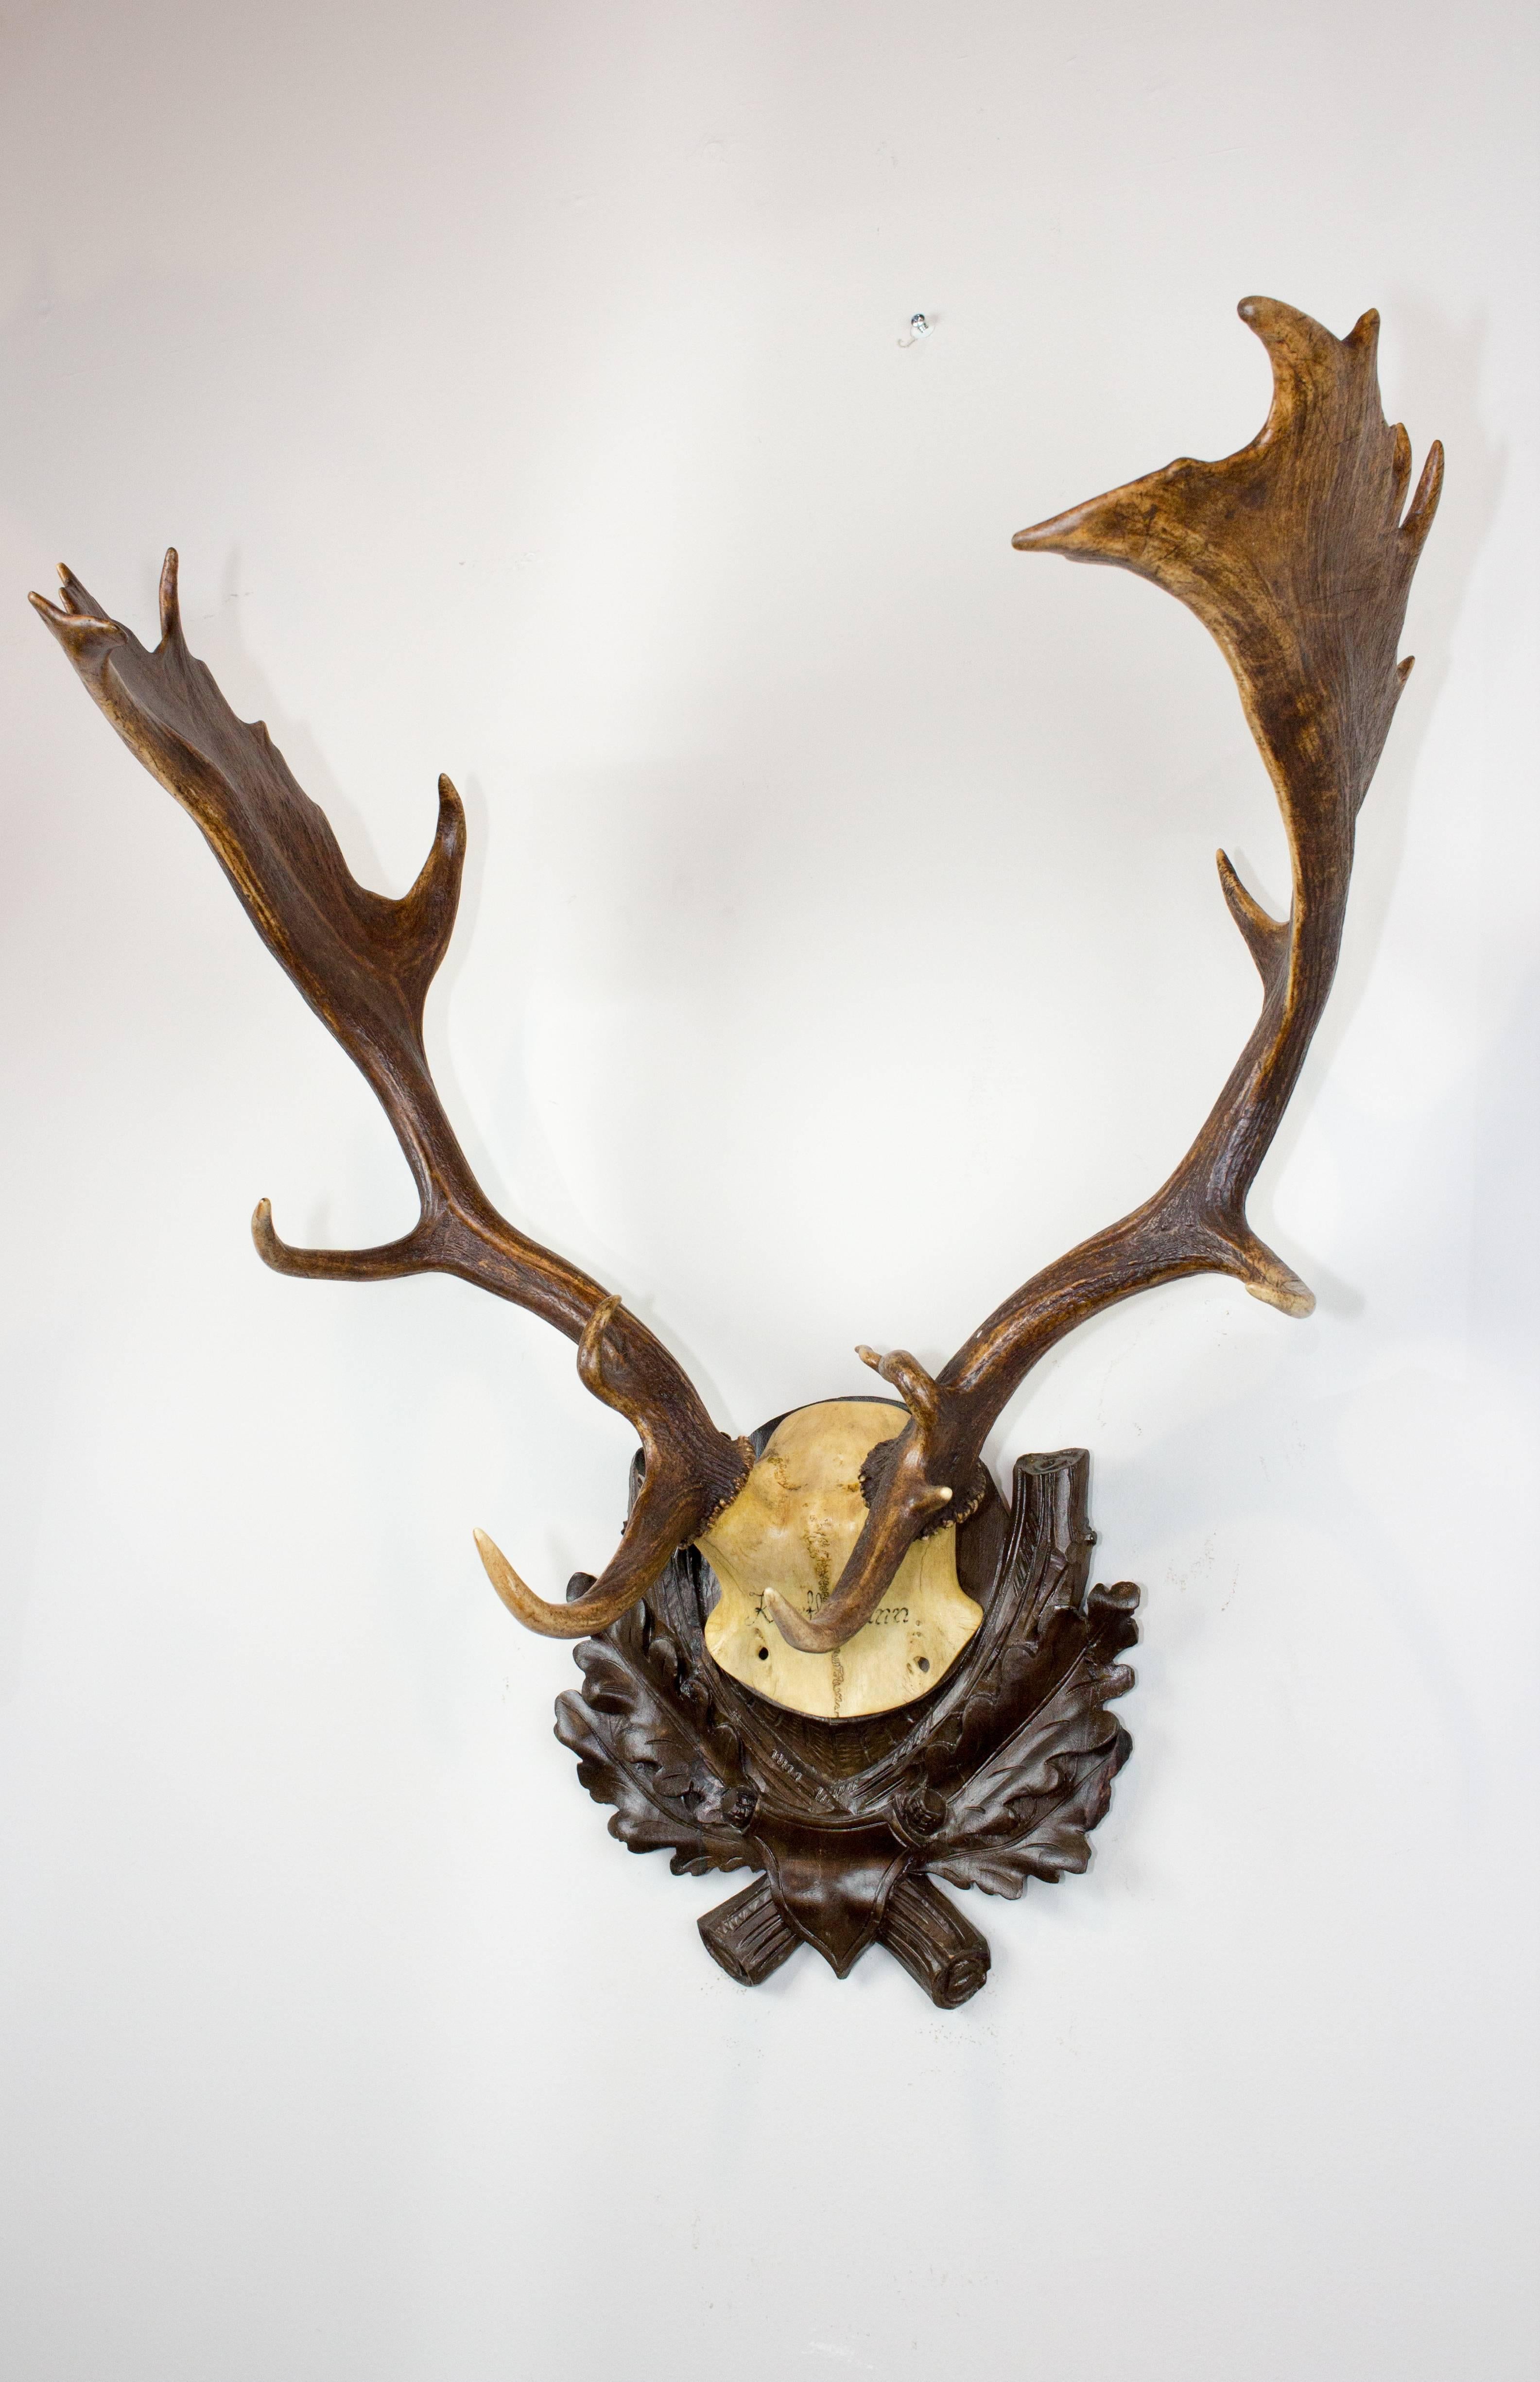 19th century fallow deer on original Black Forest carved plaque that hung in Emperor Franz Joseph's castle at Eckartsau in the Southern Austrian Alps. Eckartsau was a favorite hunting schloss of the Habsburg family. This trophy features the original